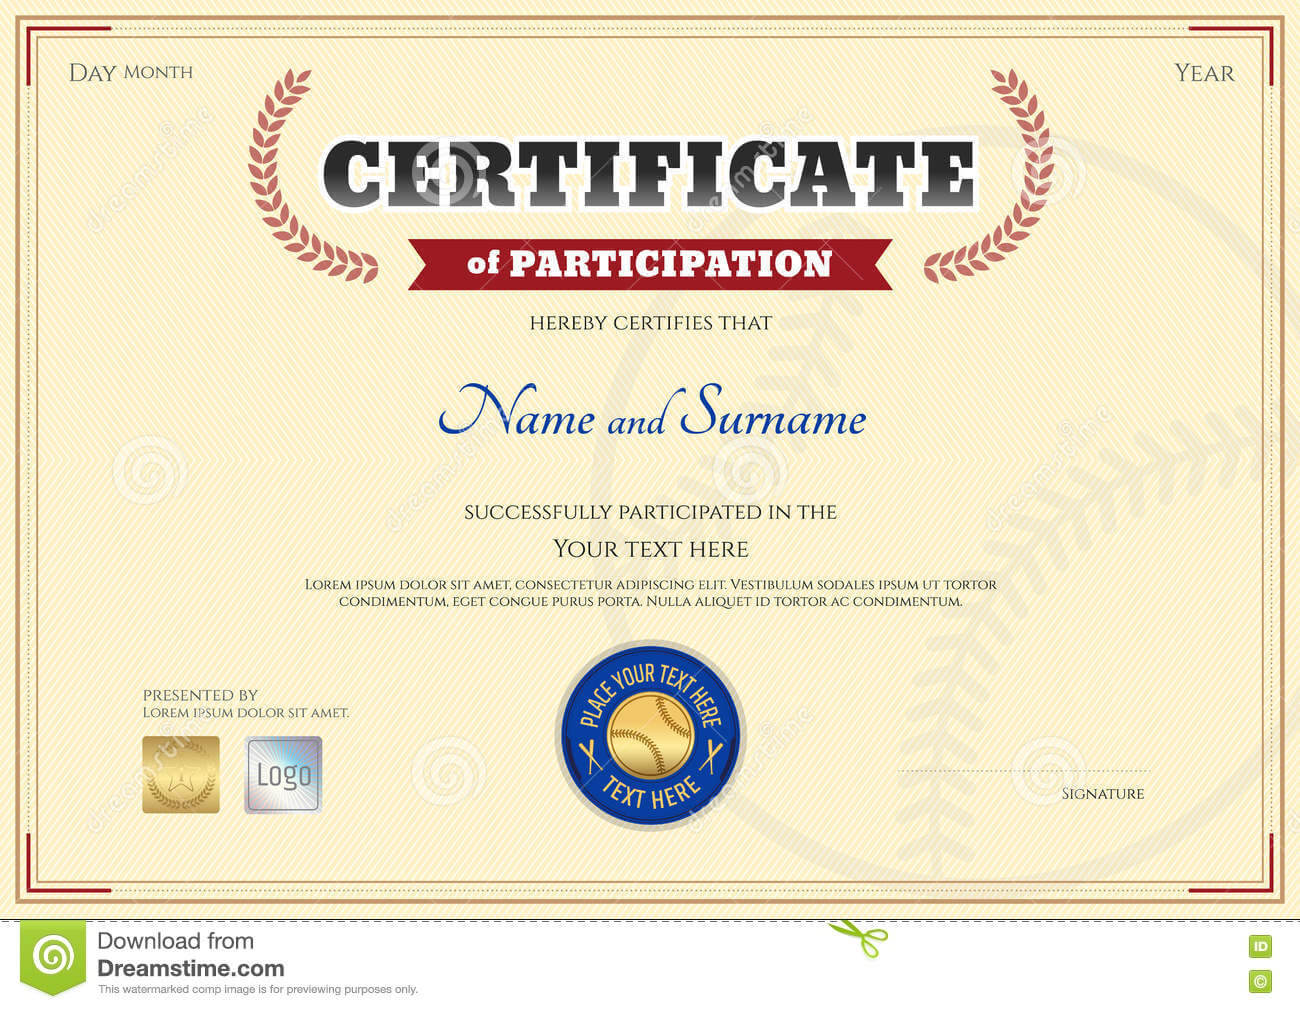 Certificate Of Participation Template In Baseball Sport For Participation Certificate Templates Free Download